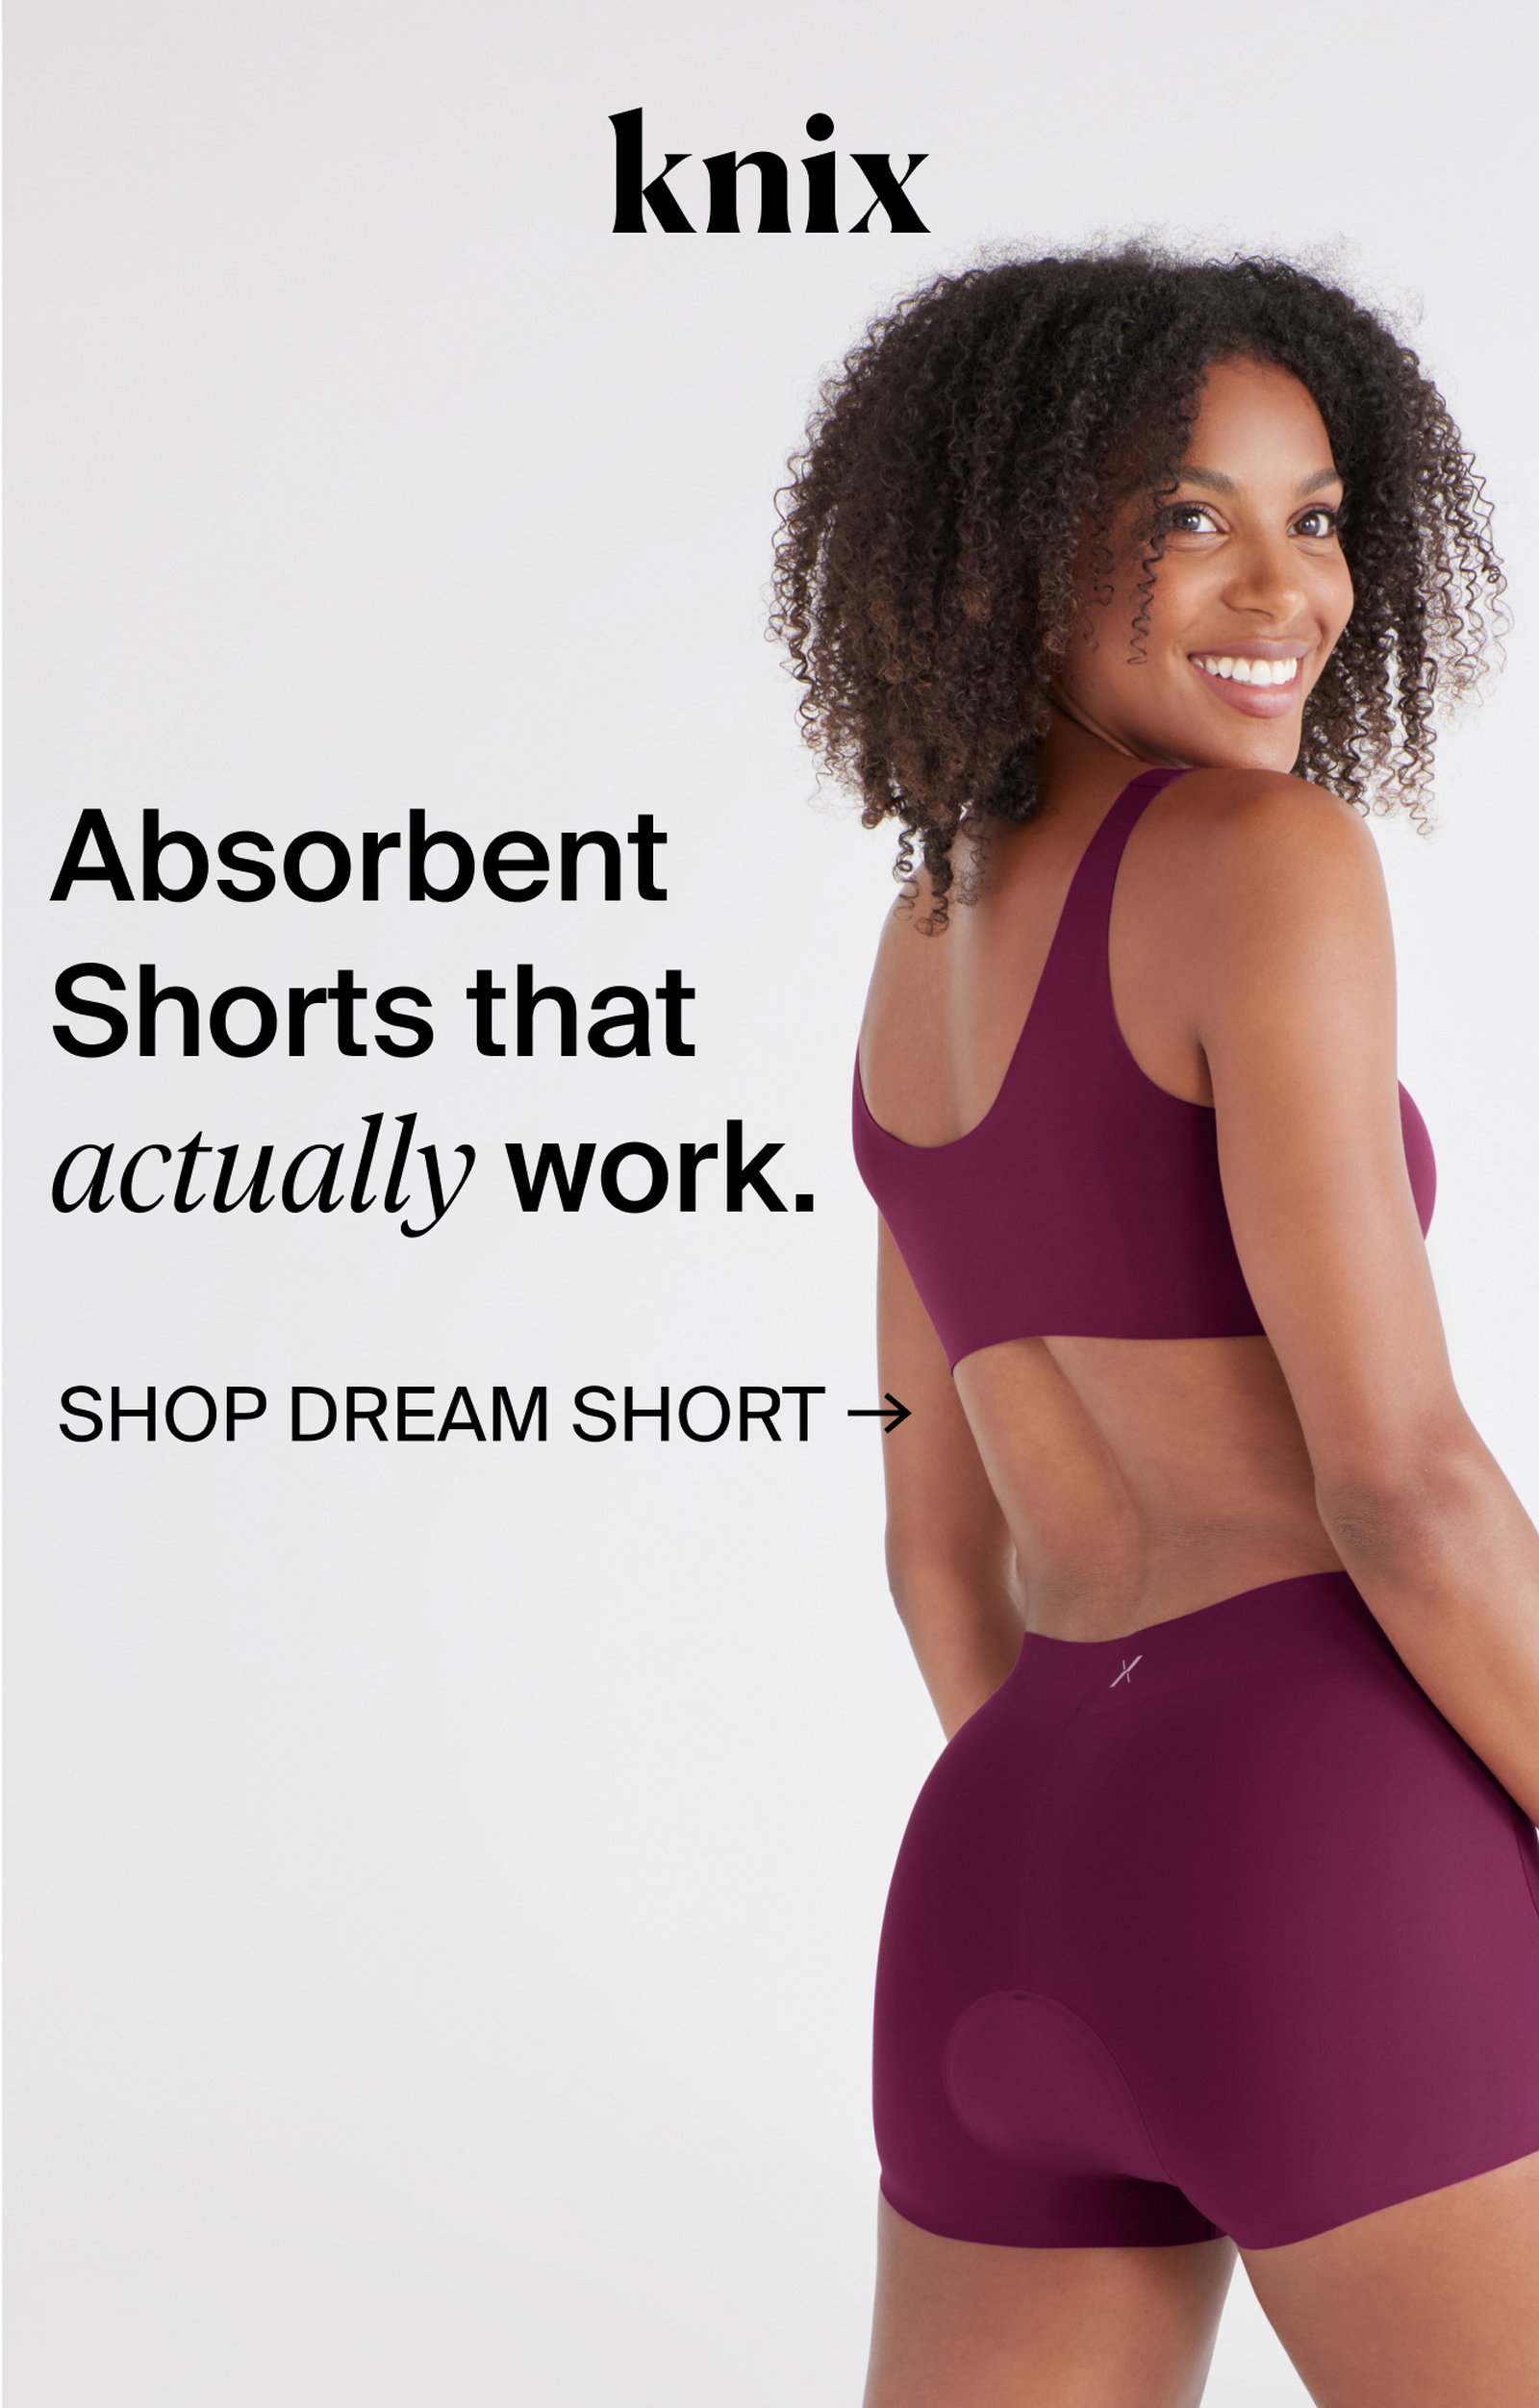 Knix: These Shorts Absorb 12 Pads Worth!?